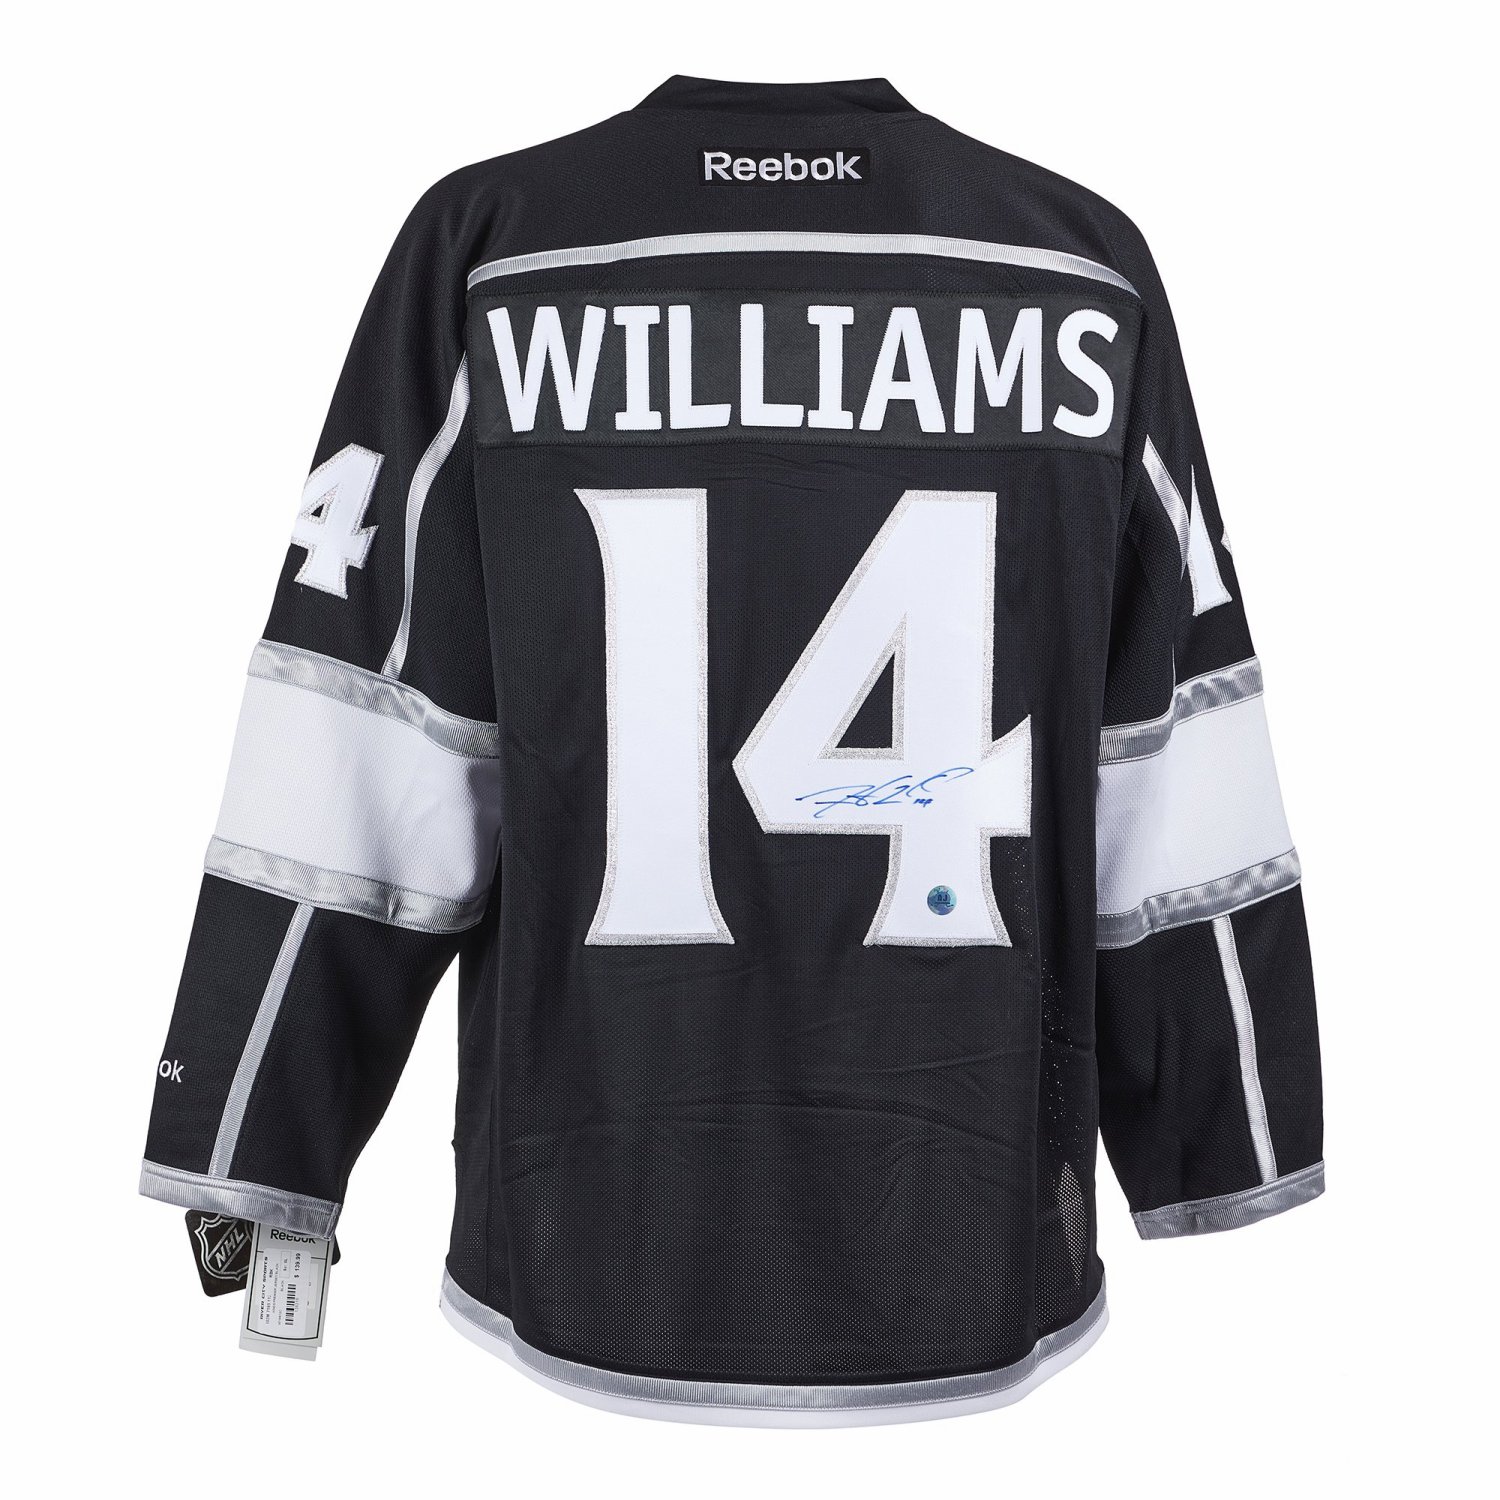 Justin Williams LA Kings Autographed Signed 2014 Stanley Cup Reebok Jersey